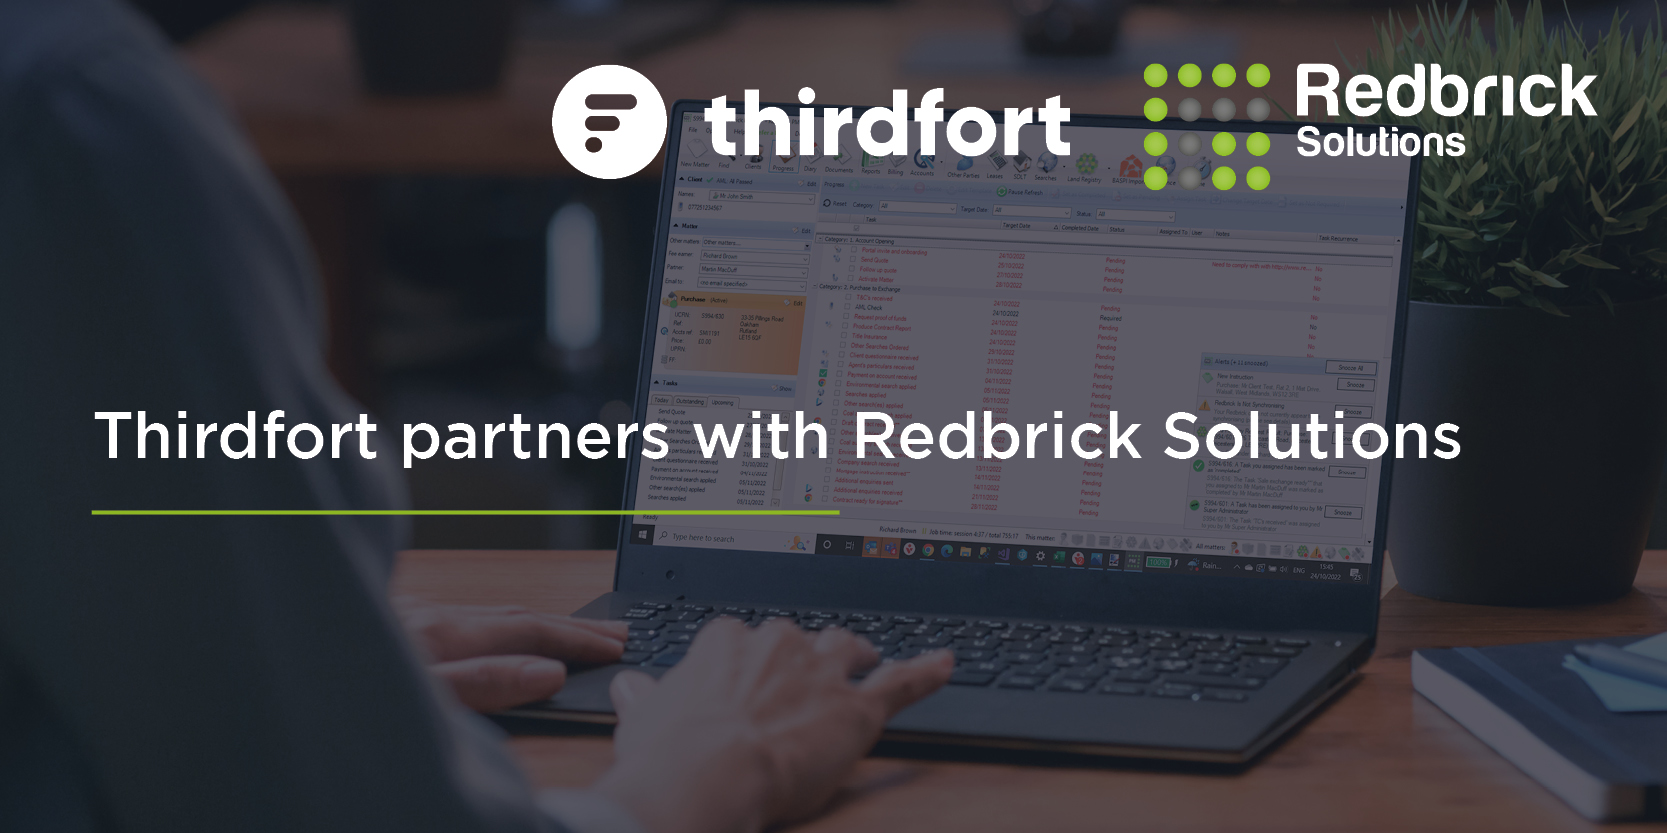 Thirdfort partners with Redbrick Solutions